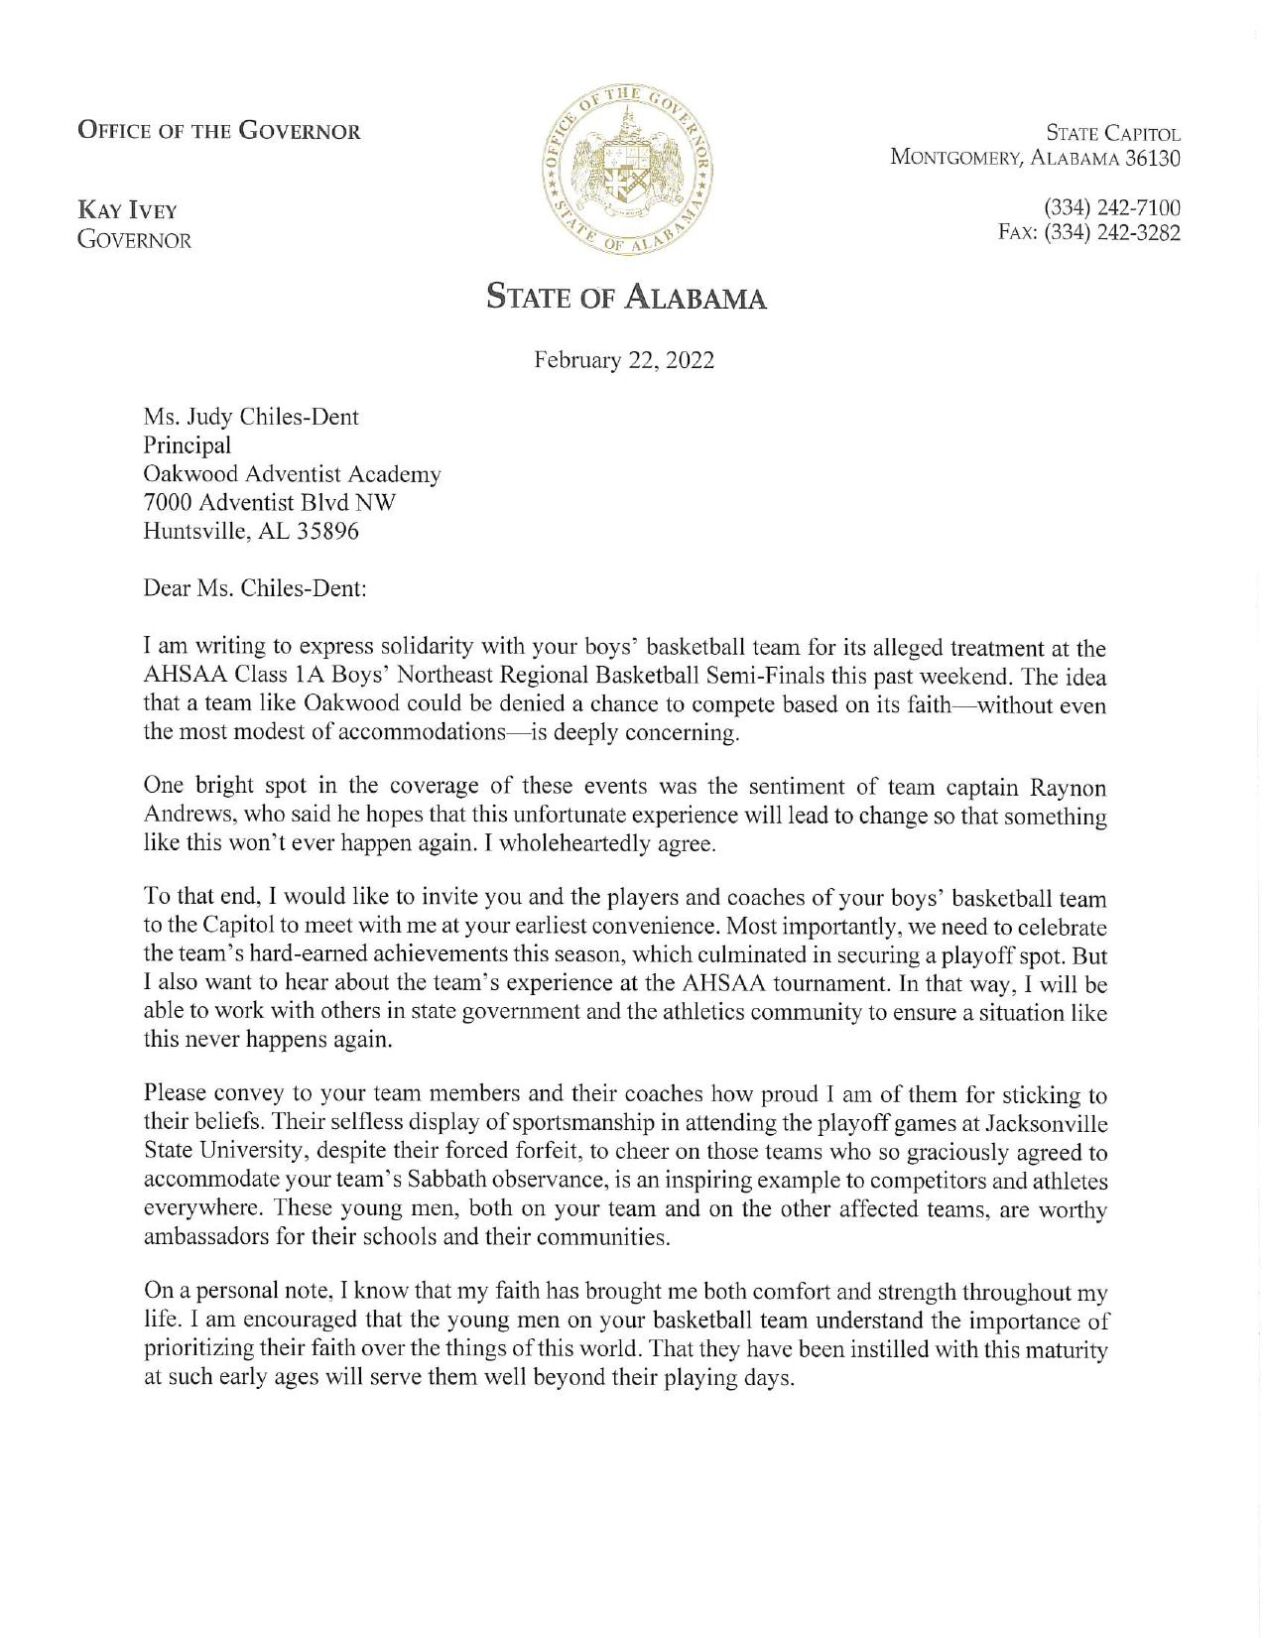 Gov. Kay Ivey letter to Oakwood Adventist Academy